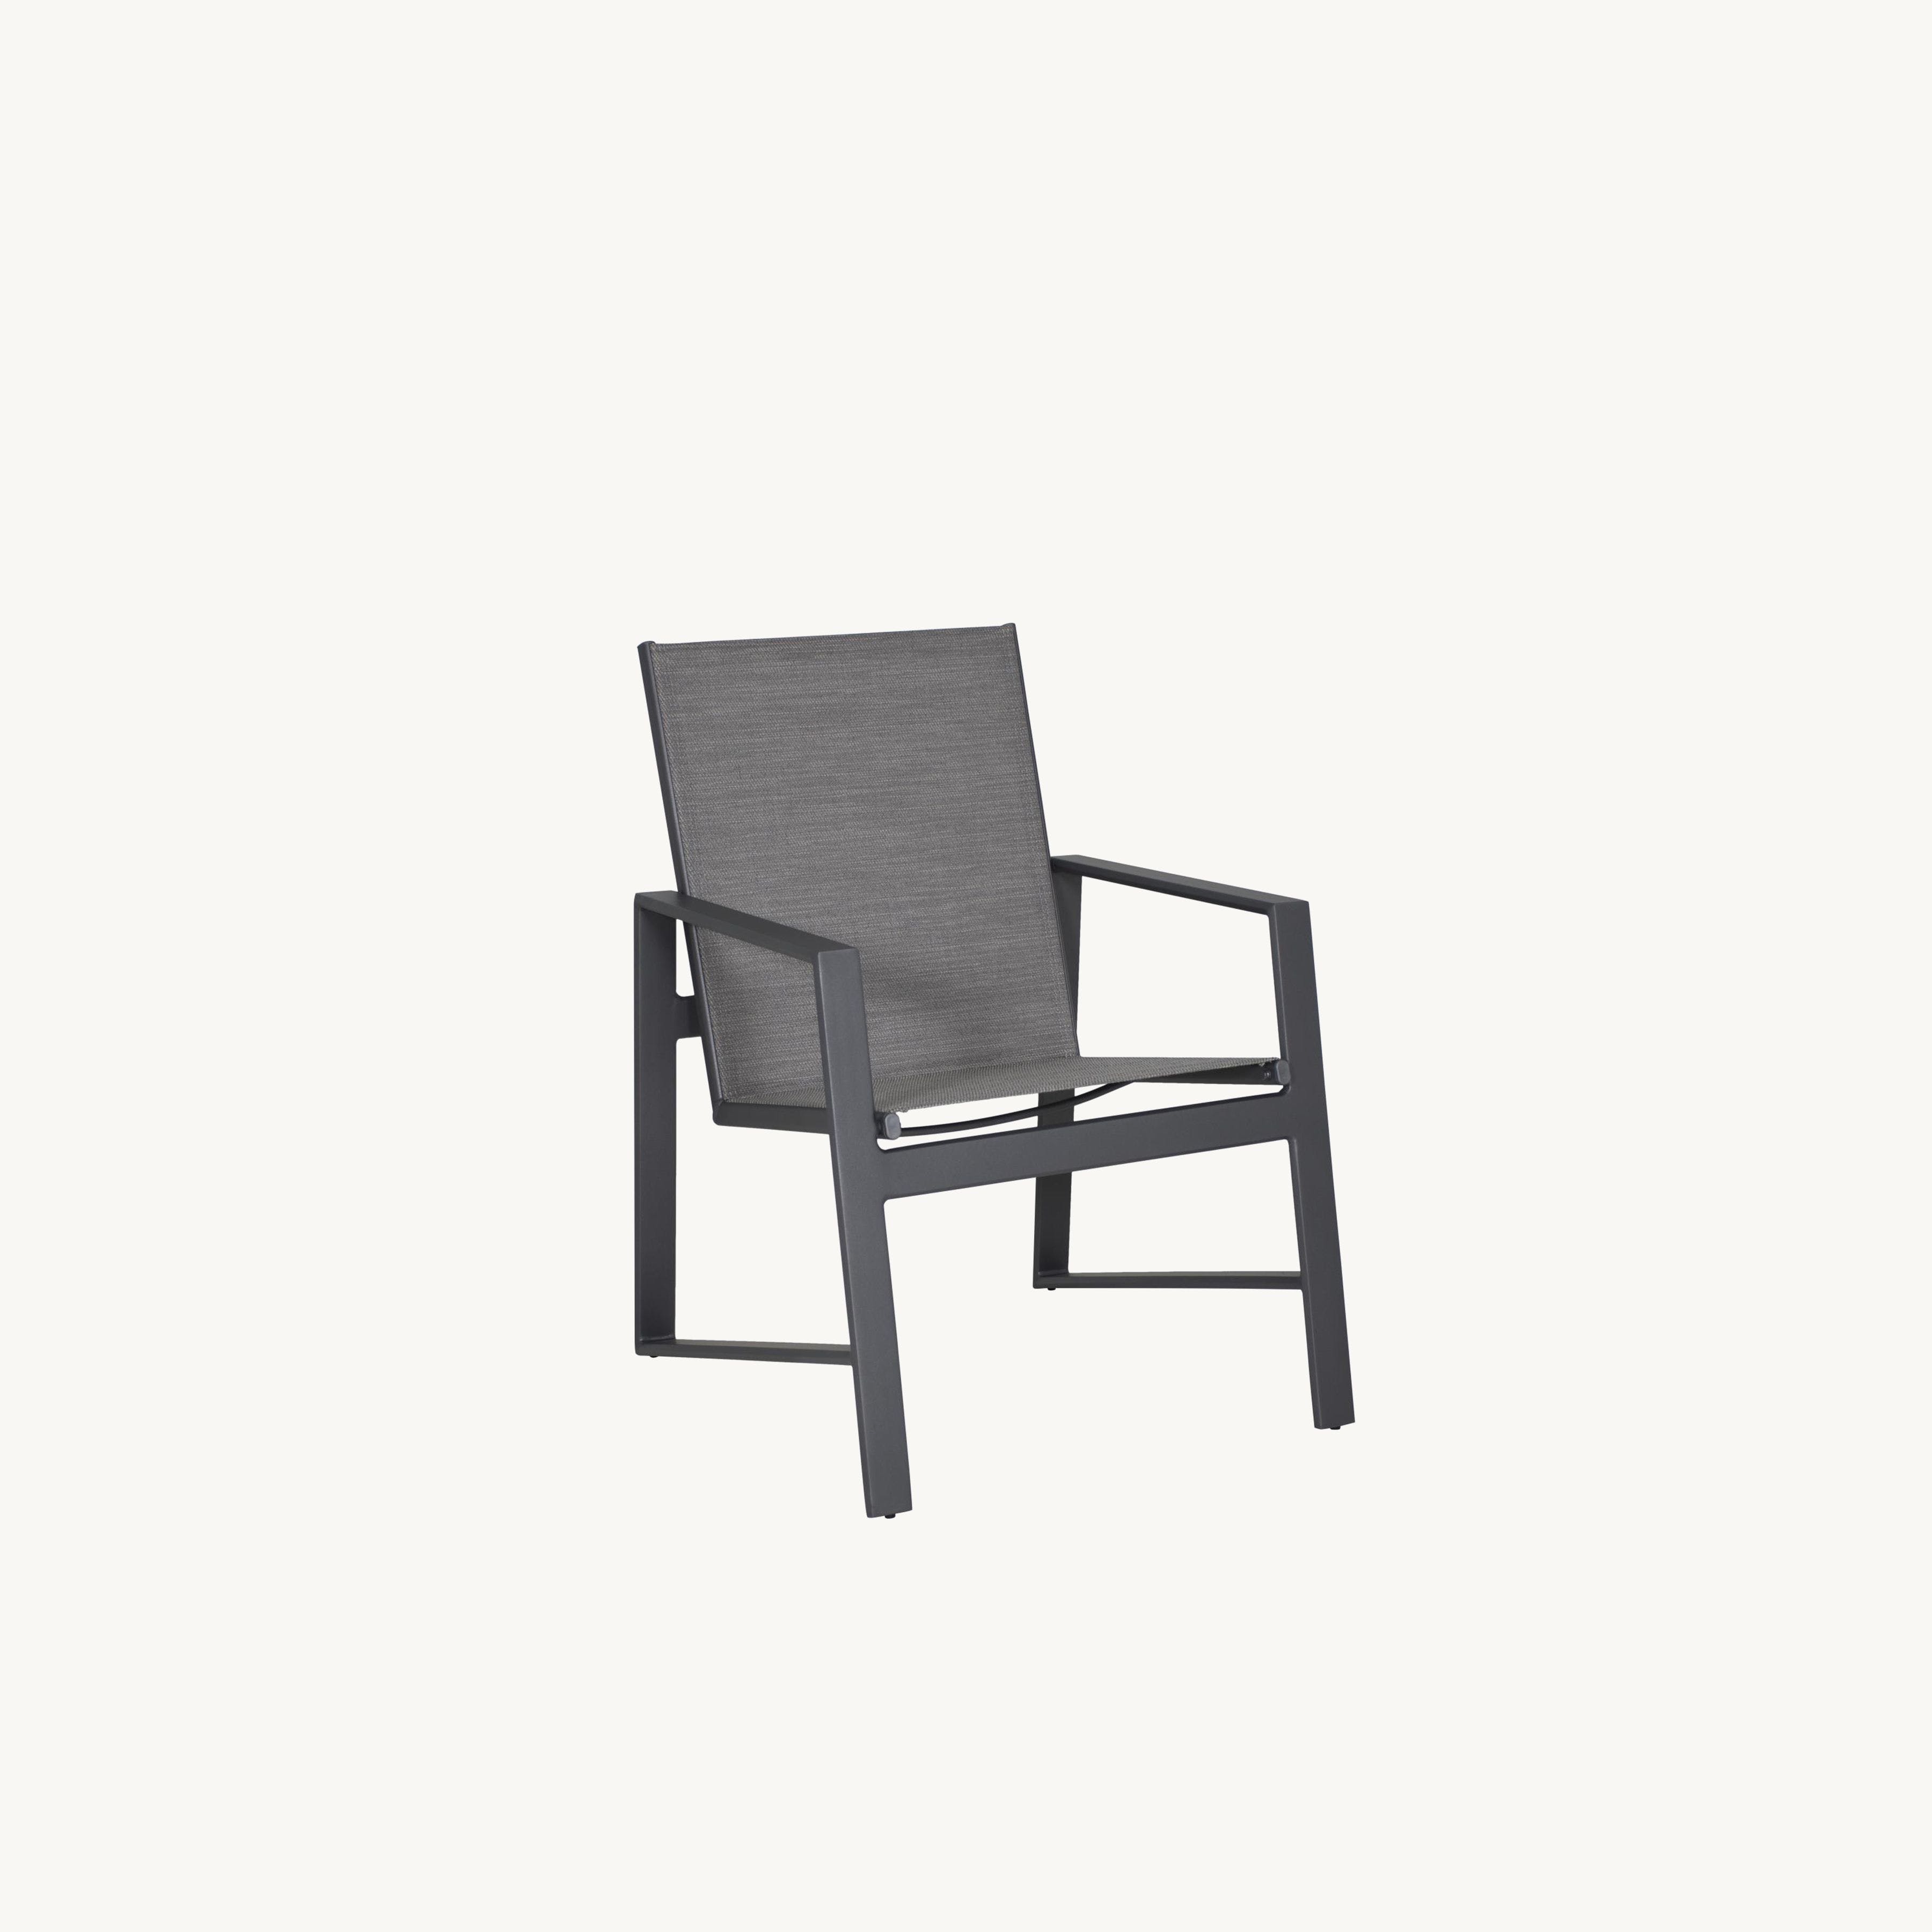 Prism Sling Dining Chair By Castelle